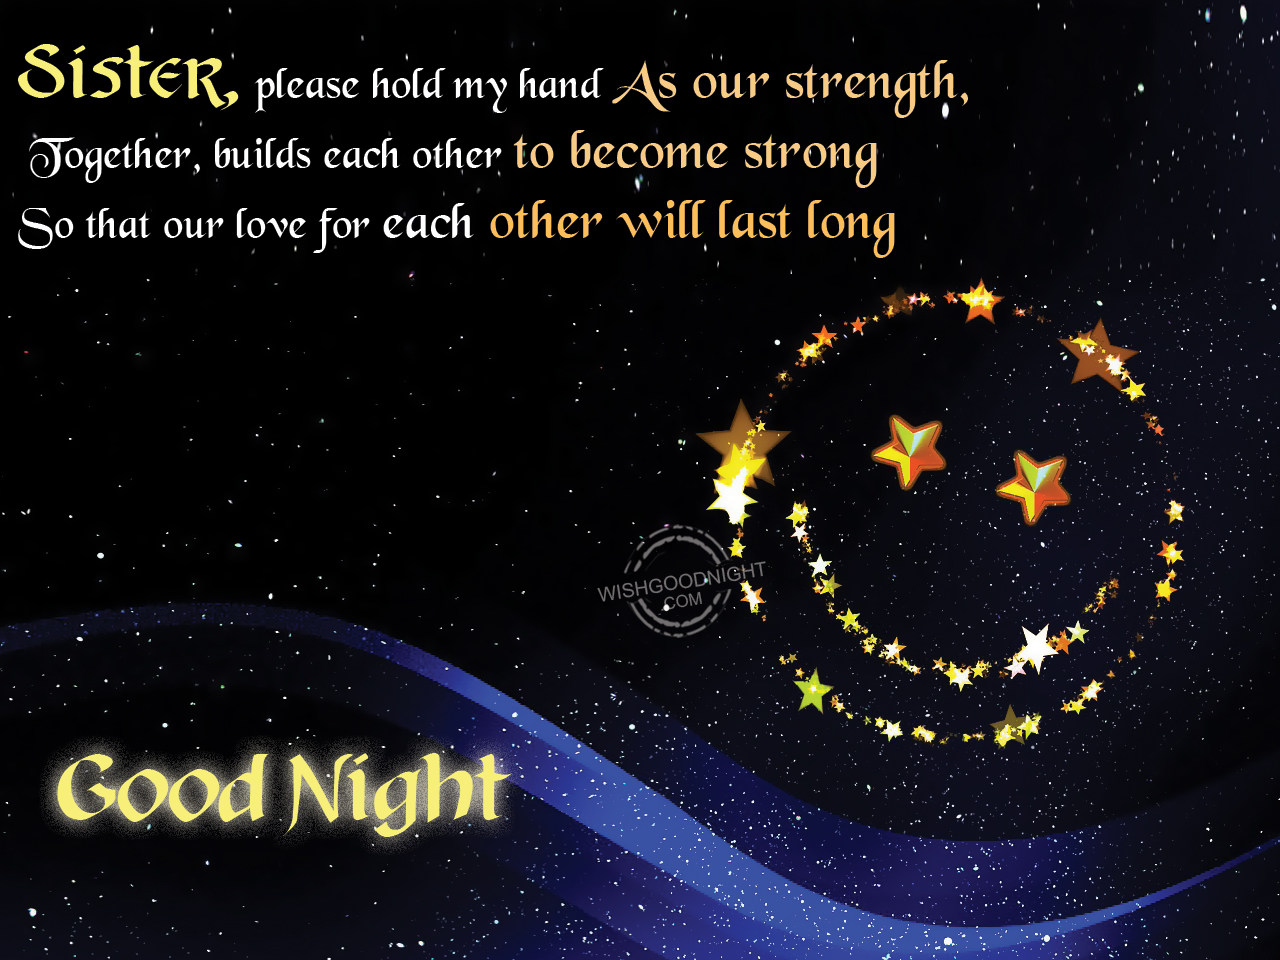 Good Night Wishes For Sister - HD Wallpaper 